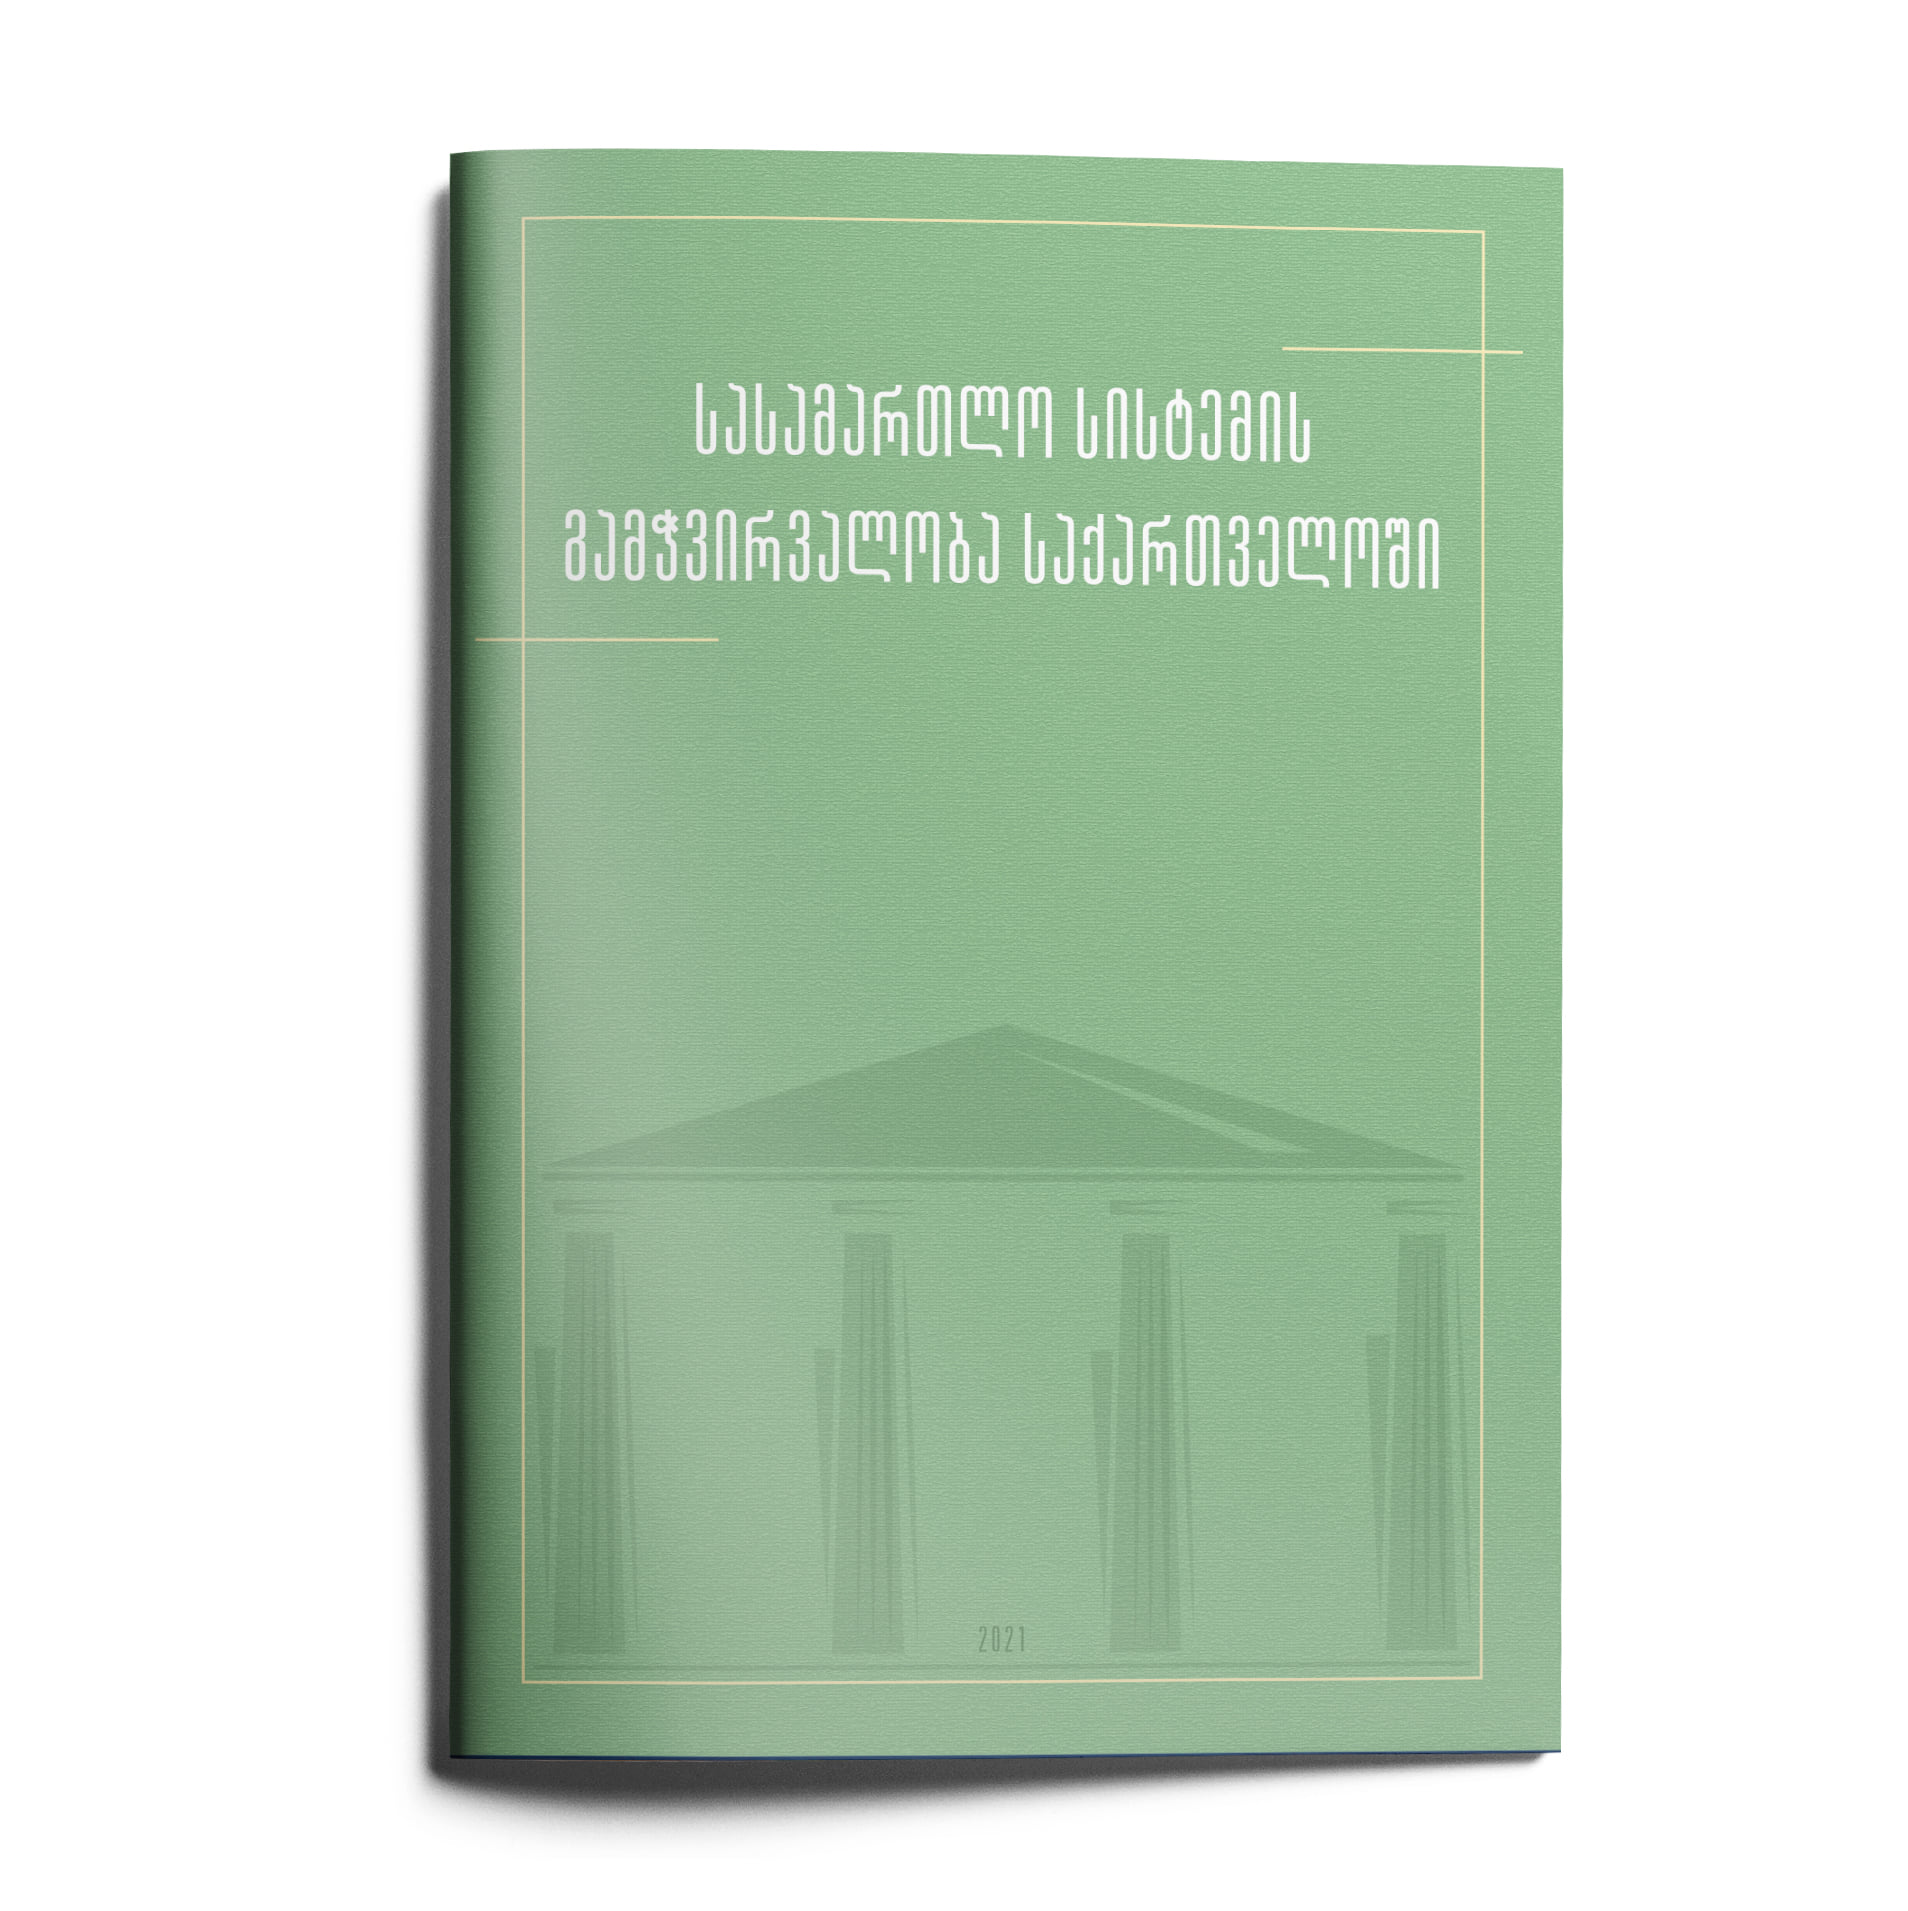 Transparency of the judiciary in Georgia - Key findings